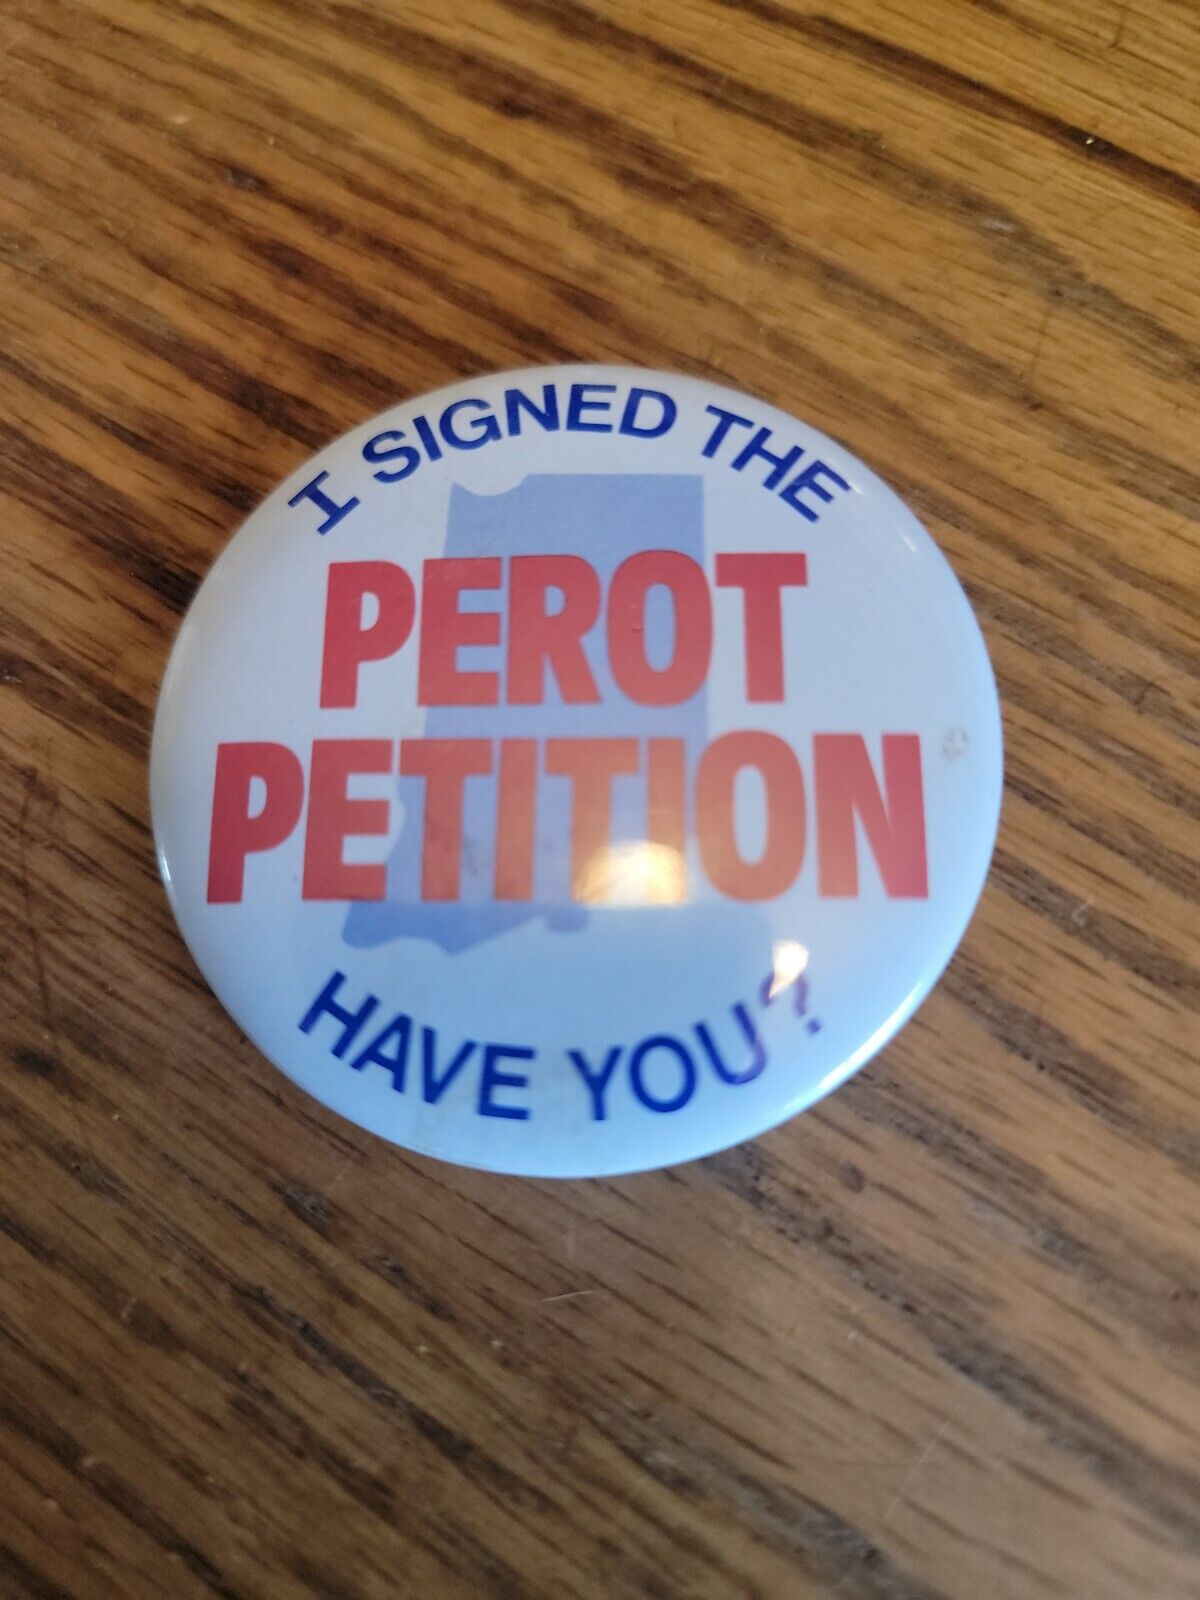 I SIGNED THE ROSS PEROT PETITION HAVE YOU PINBACK PIN VTG RARE